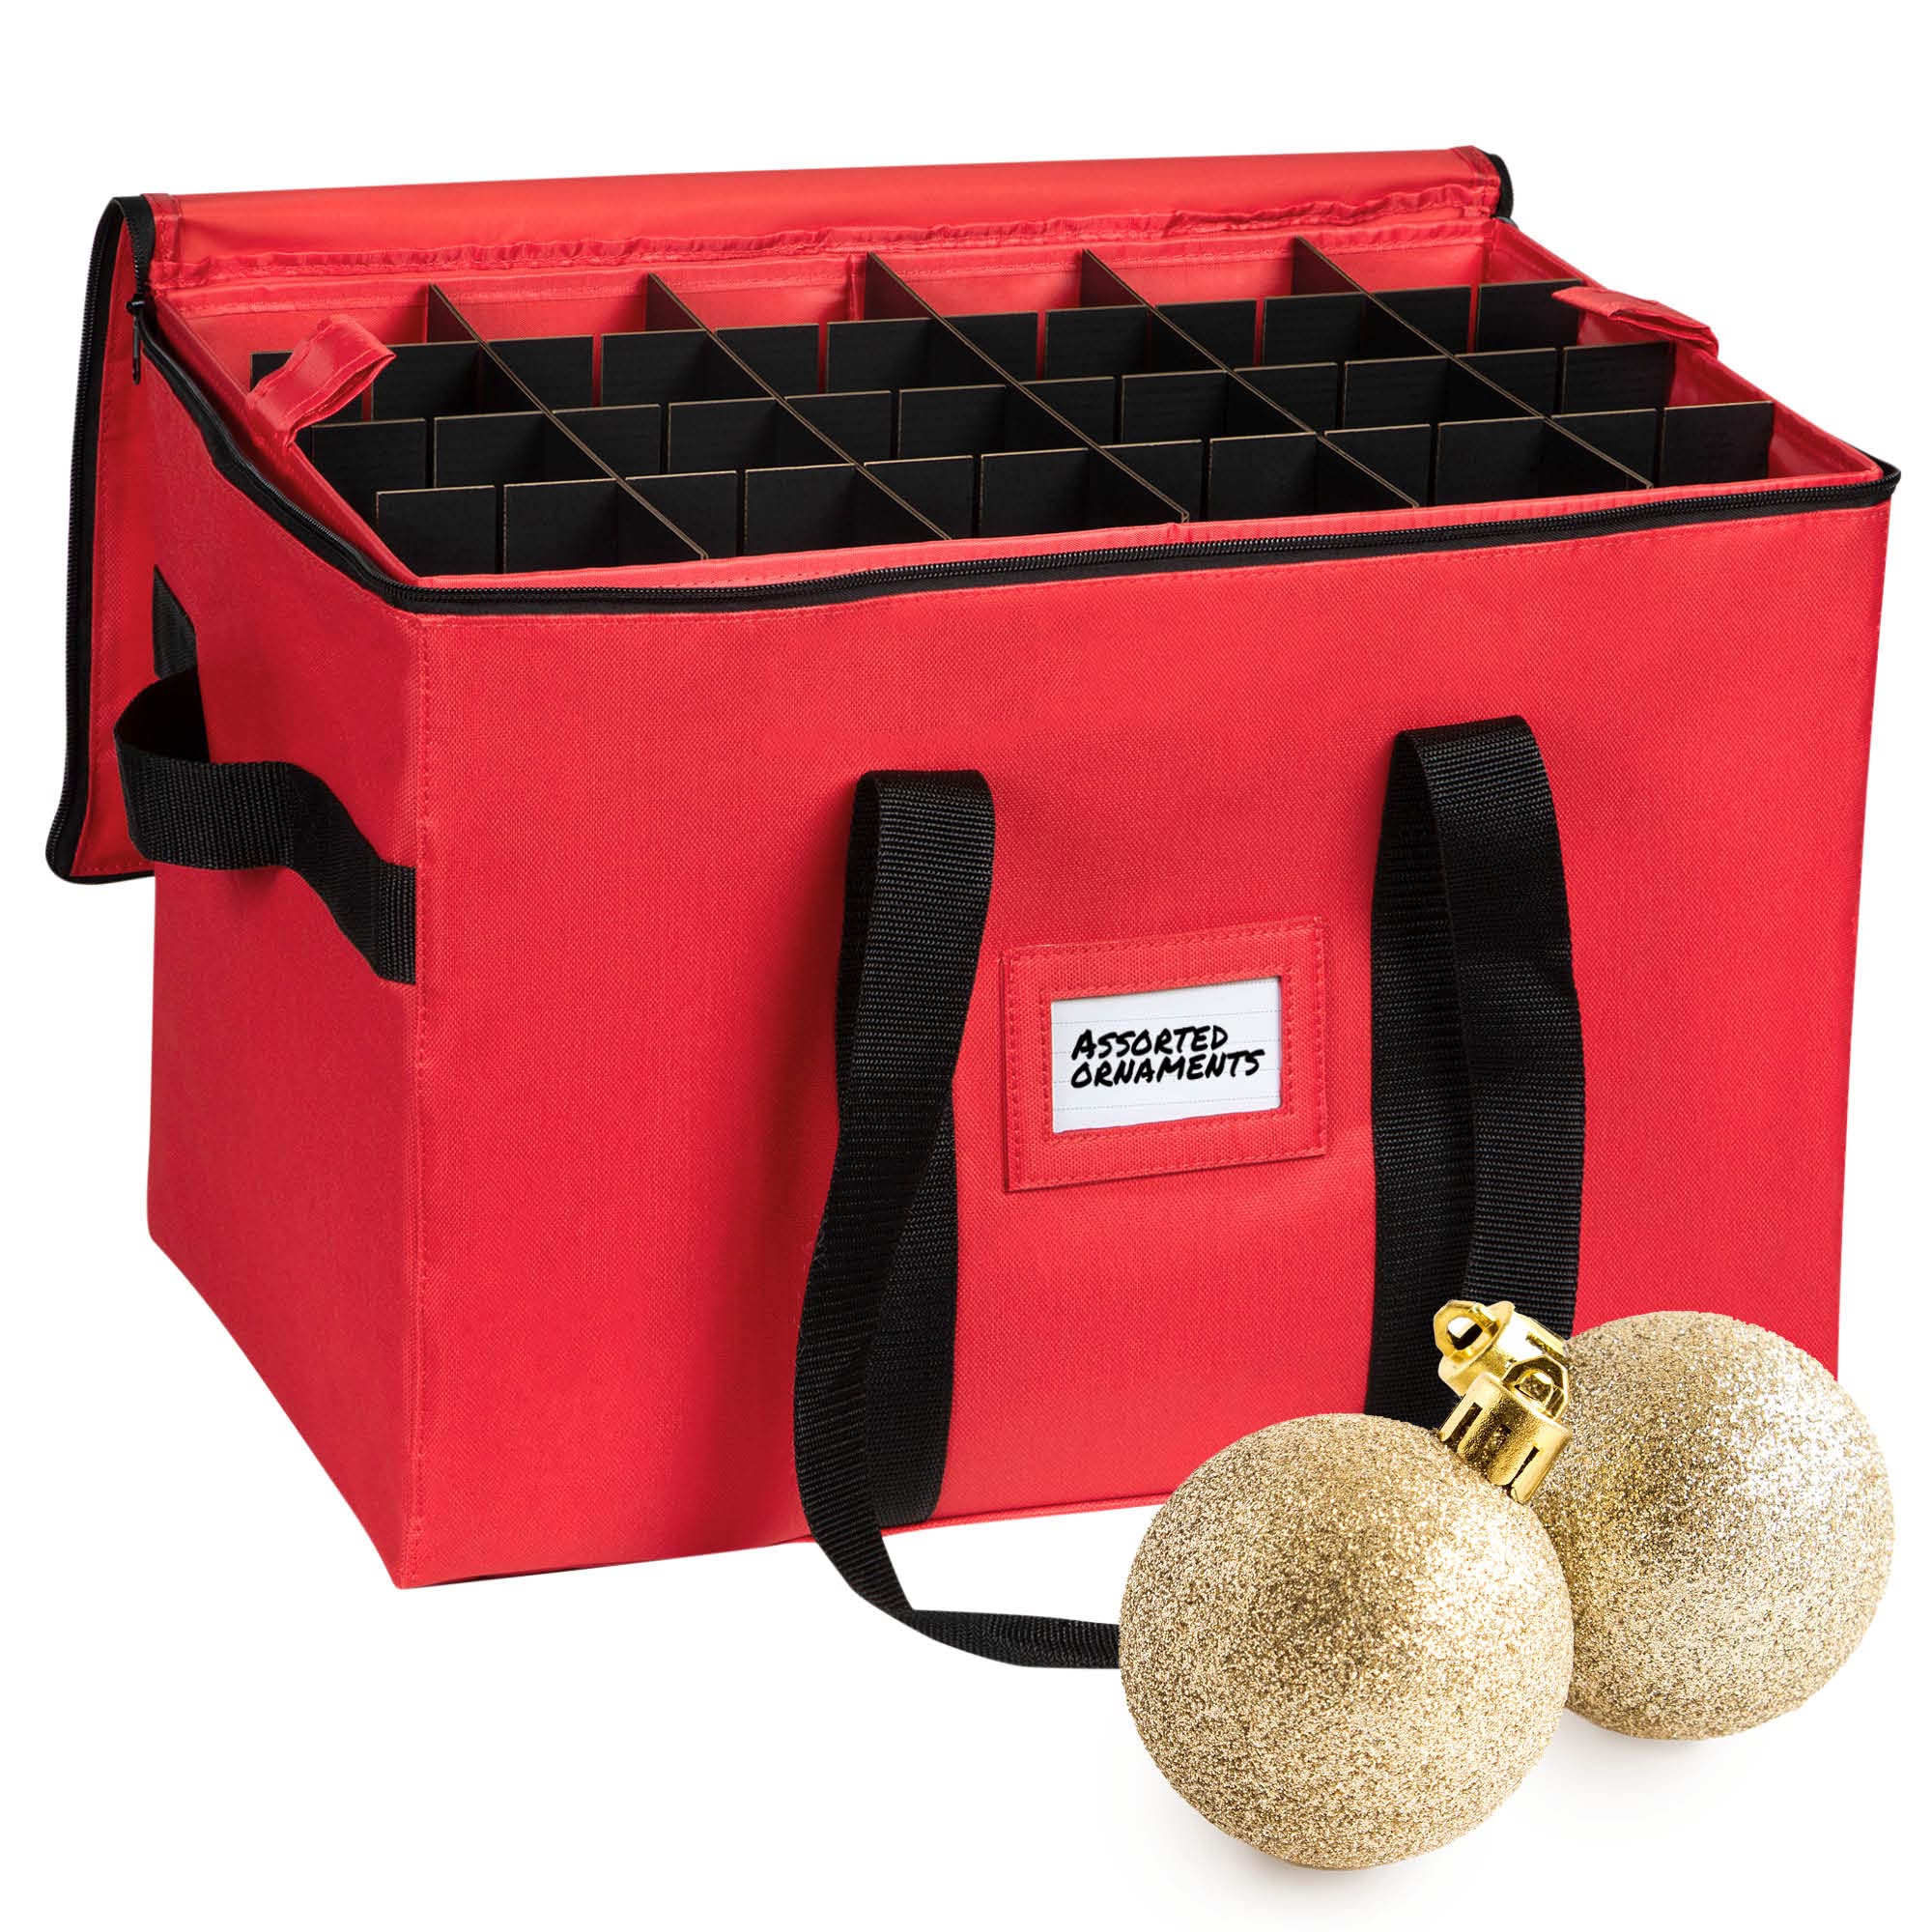 Christmas Ornament Storage Container - With Individual Trays -Heavy Duty 600D Tear Resistant Material, Zippered, Adjustable Dividers - Large